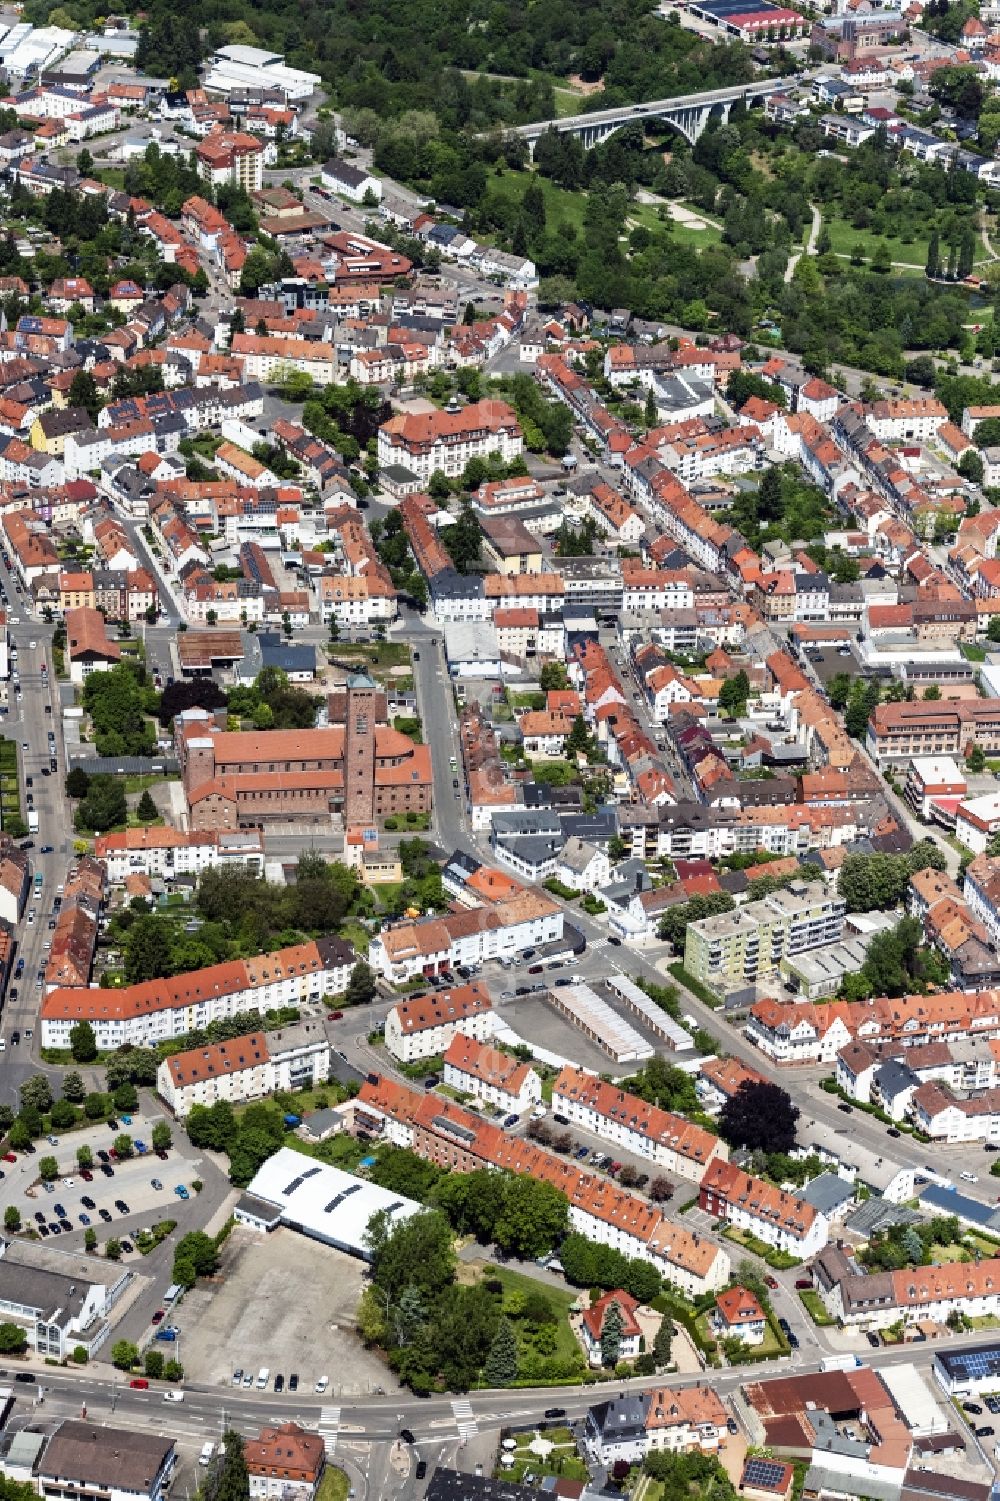 Pirmasens from above - Cityscape of the district in Pirmasens in the state Rhineland-Palatinate, Germany